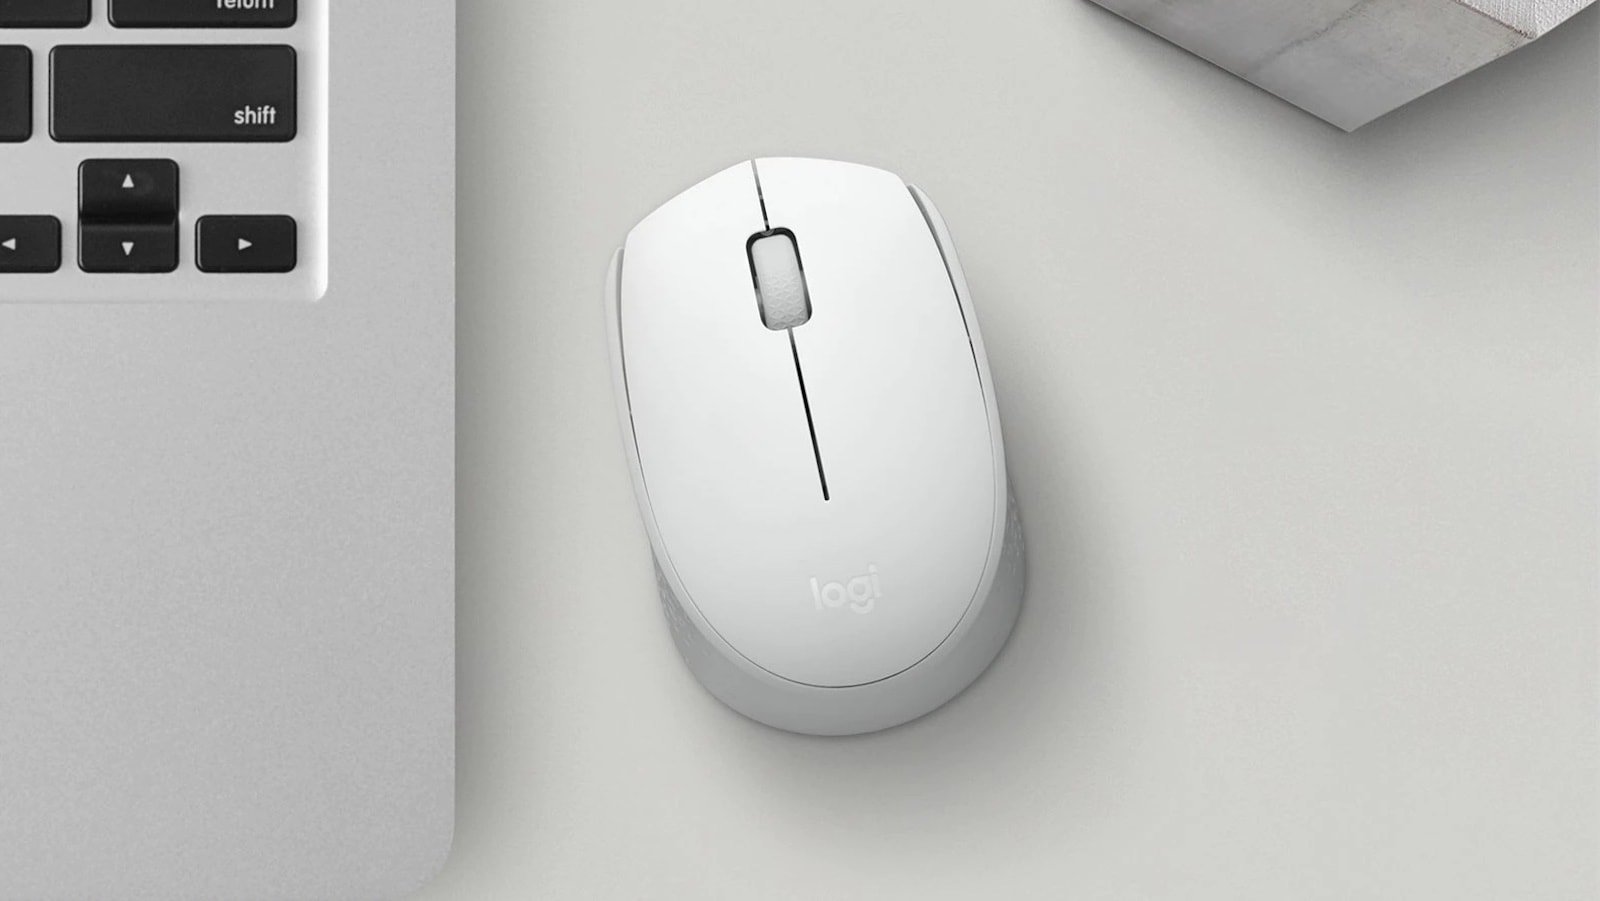 Logitech M170 Wireless Mouse is incredibly compact and has a plug-and-play design